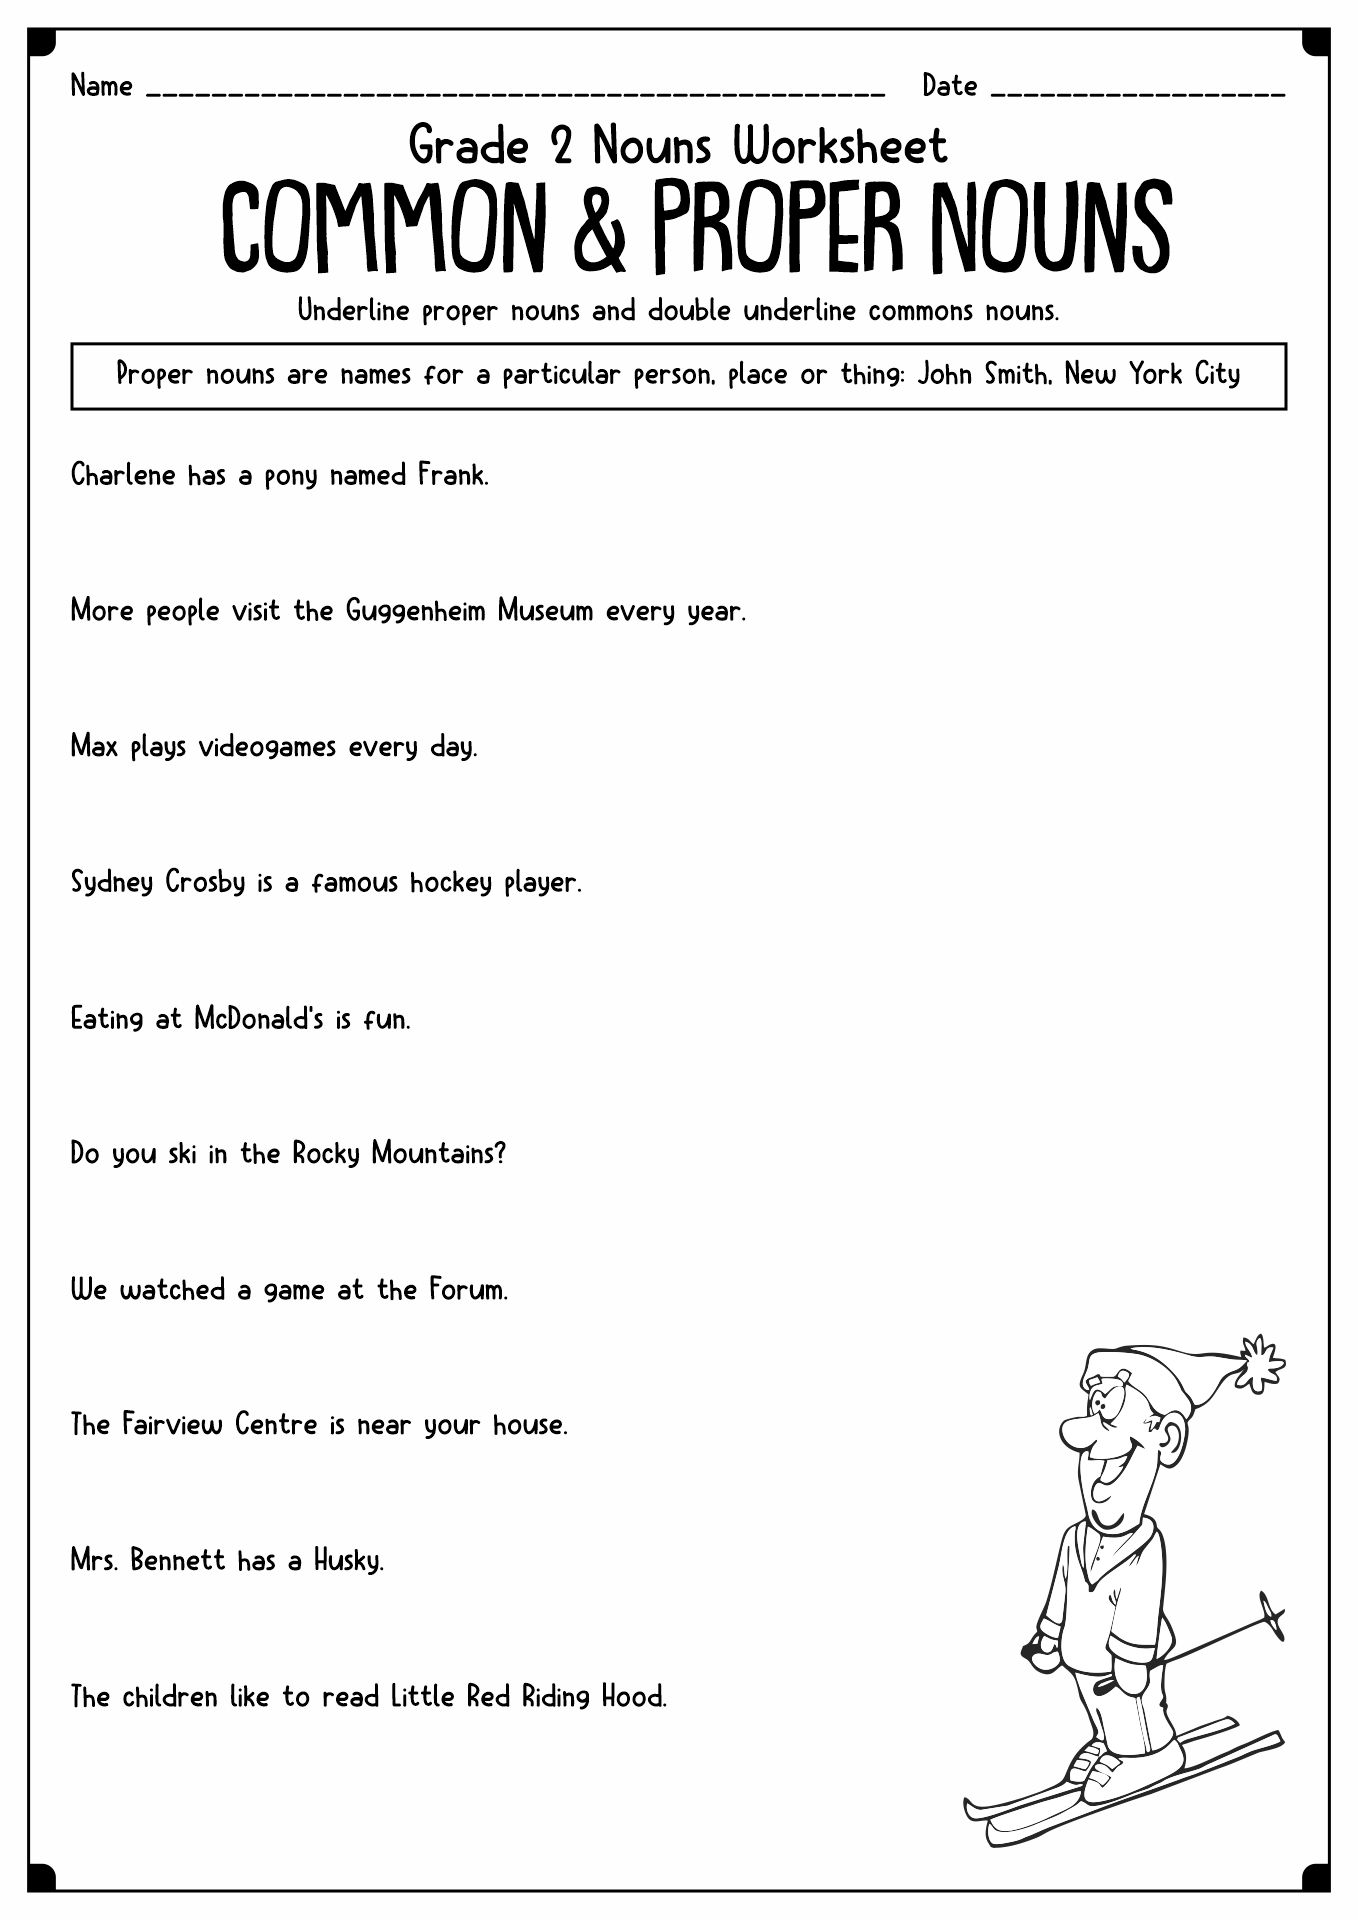 common-and-proper-nouns-worksheet-answer-key-by-robert-s-resources-proper-nouns-common-nouns